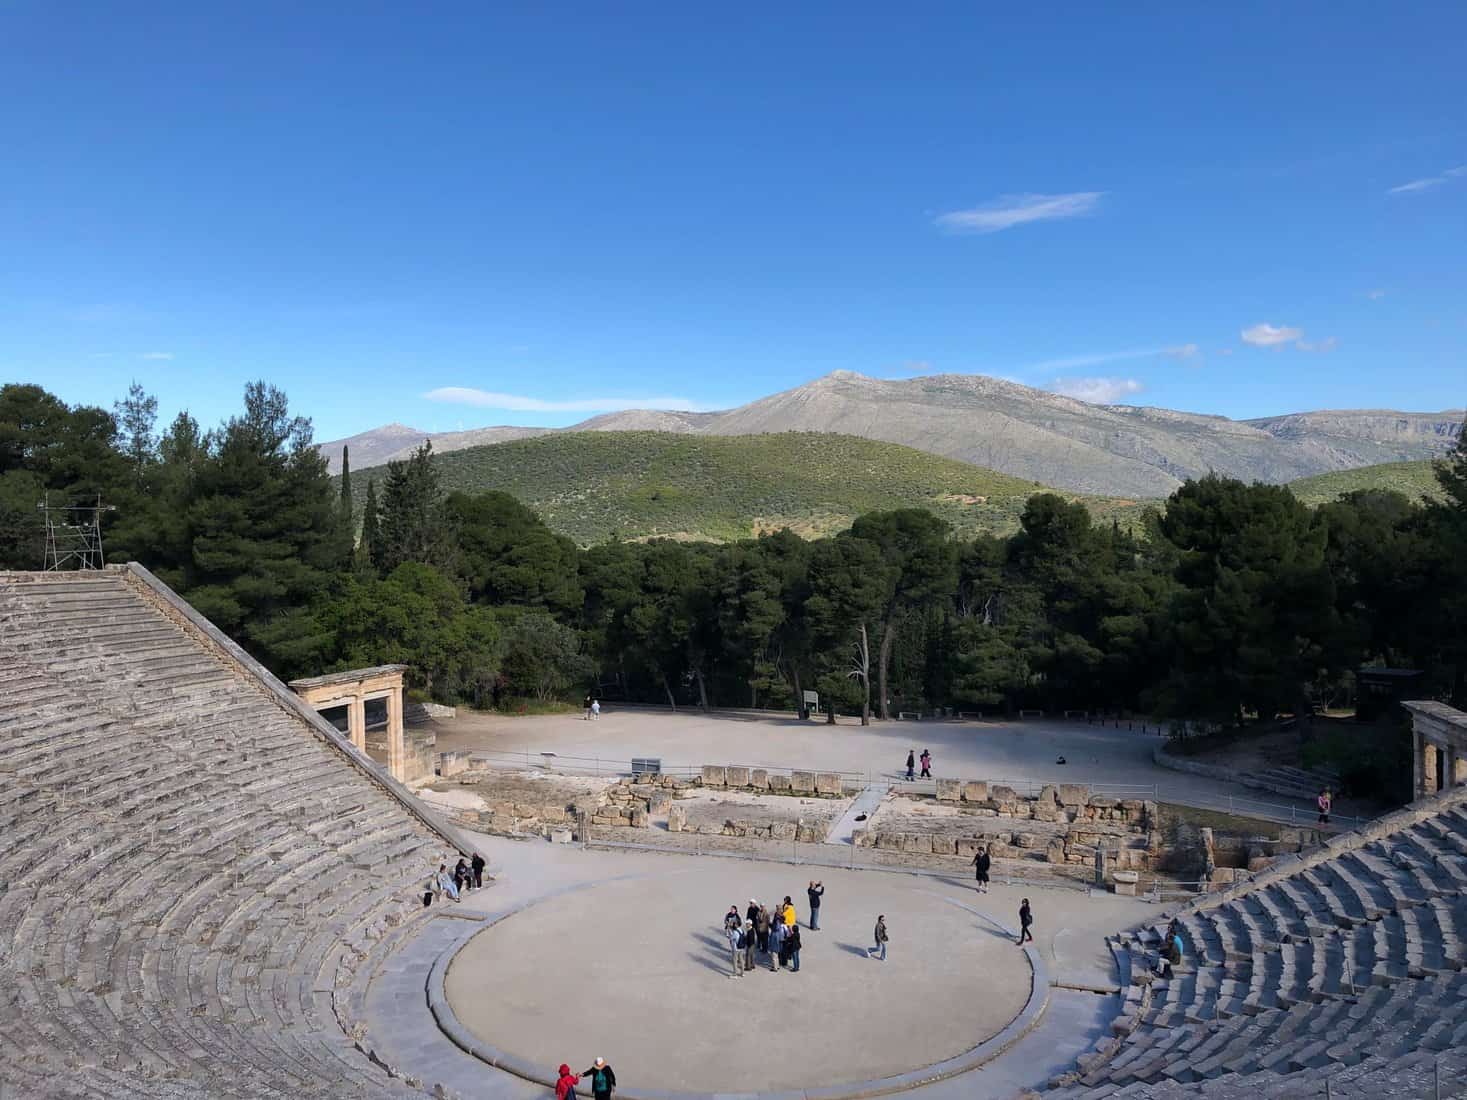 A distant blue sky, low-sloped, grey and green mountains, all preceding the ancient Greek amphitheatre of Epidaurus (Peloponnese, Greece, 2019).